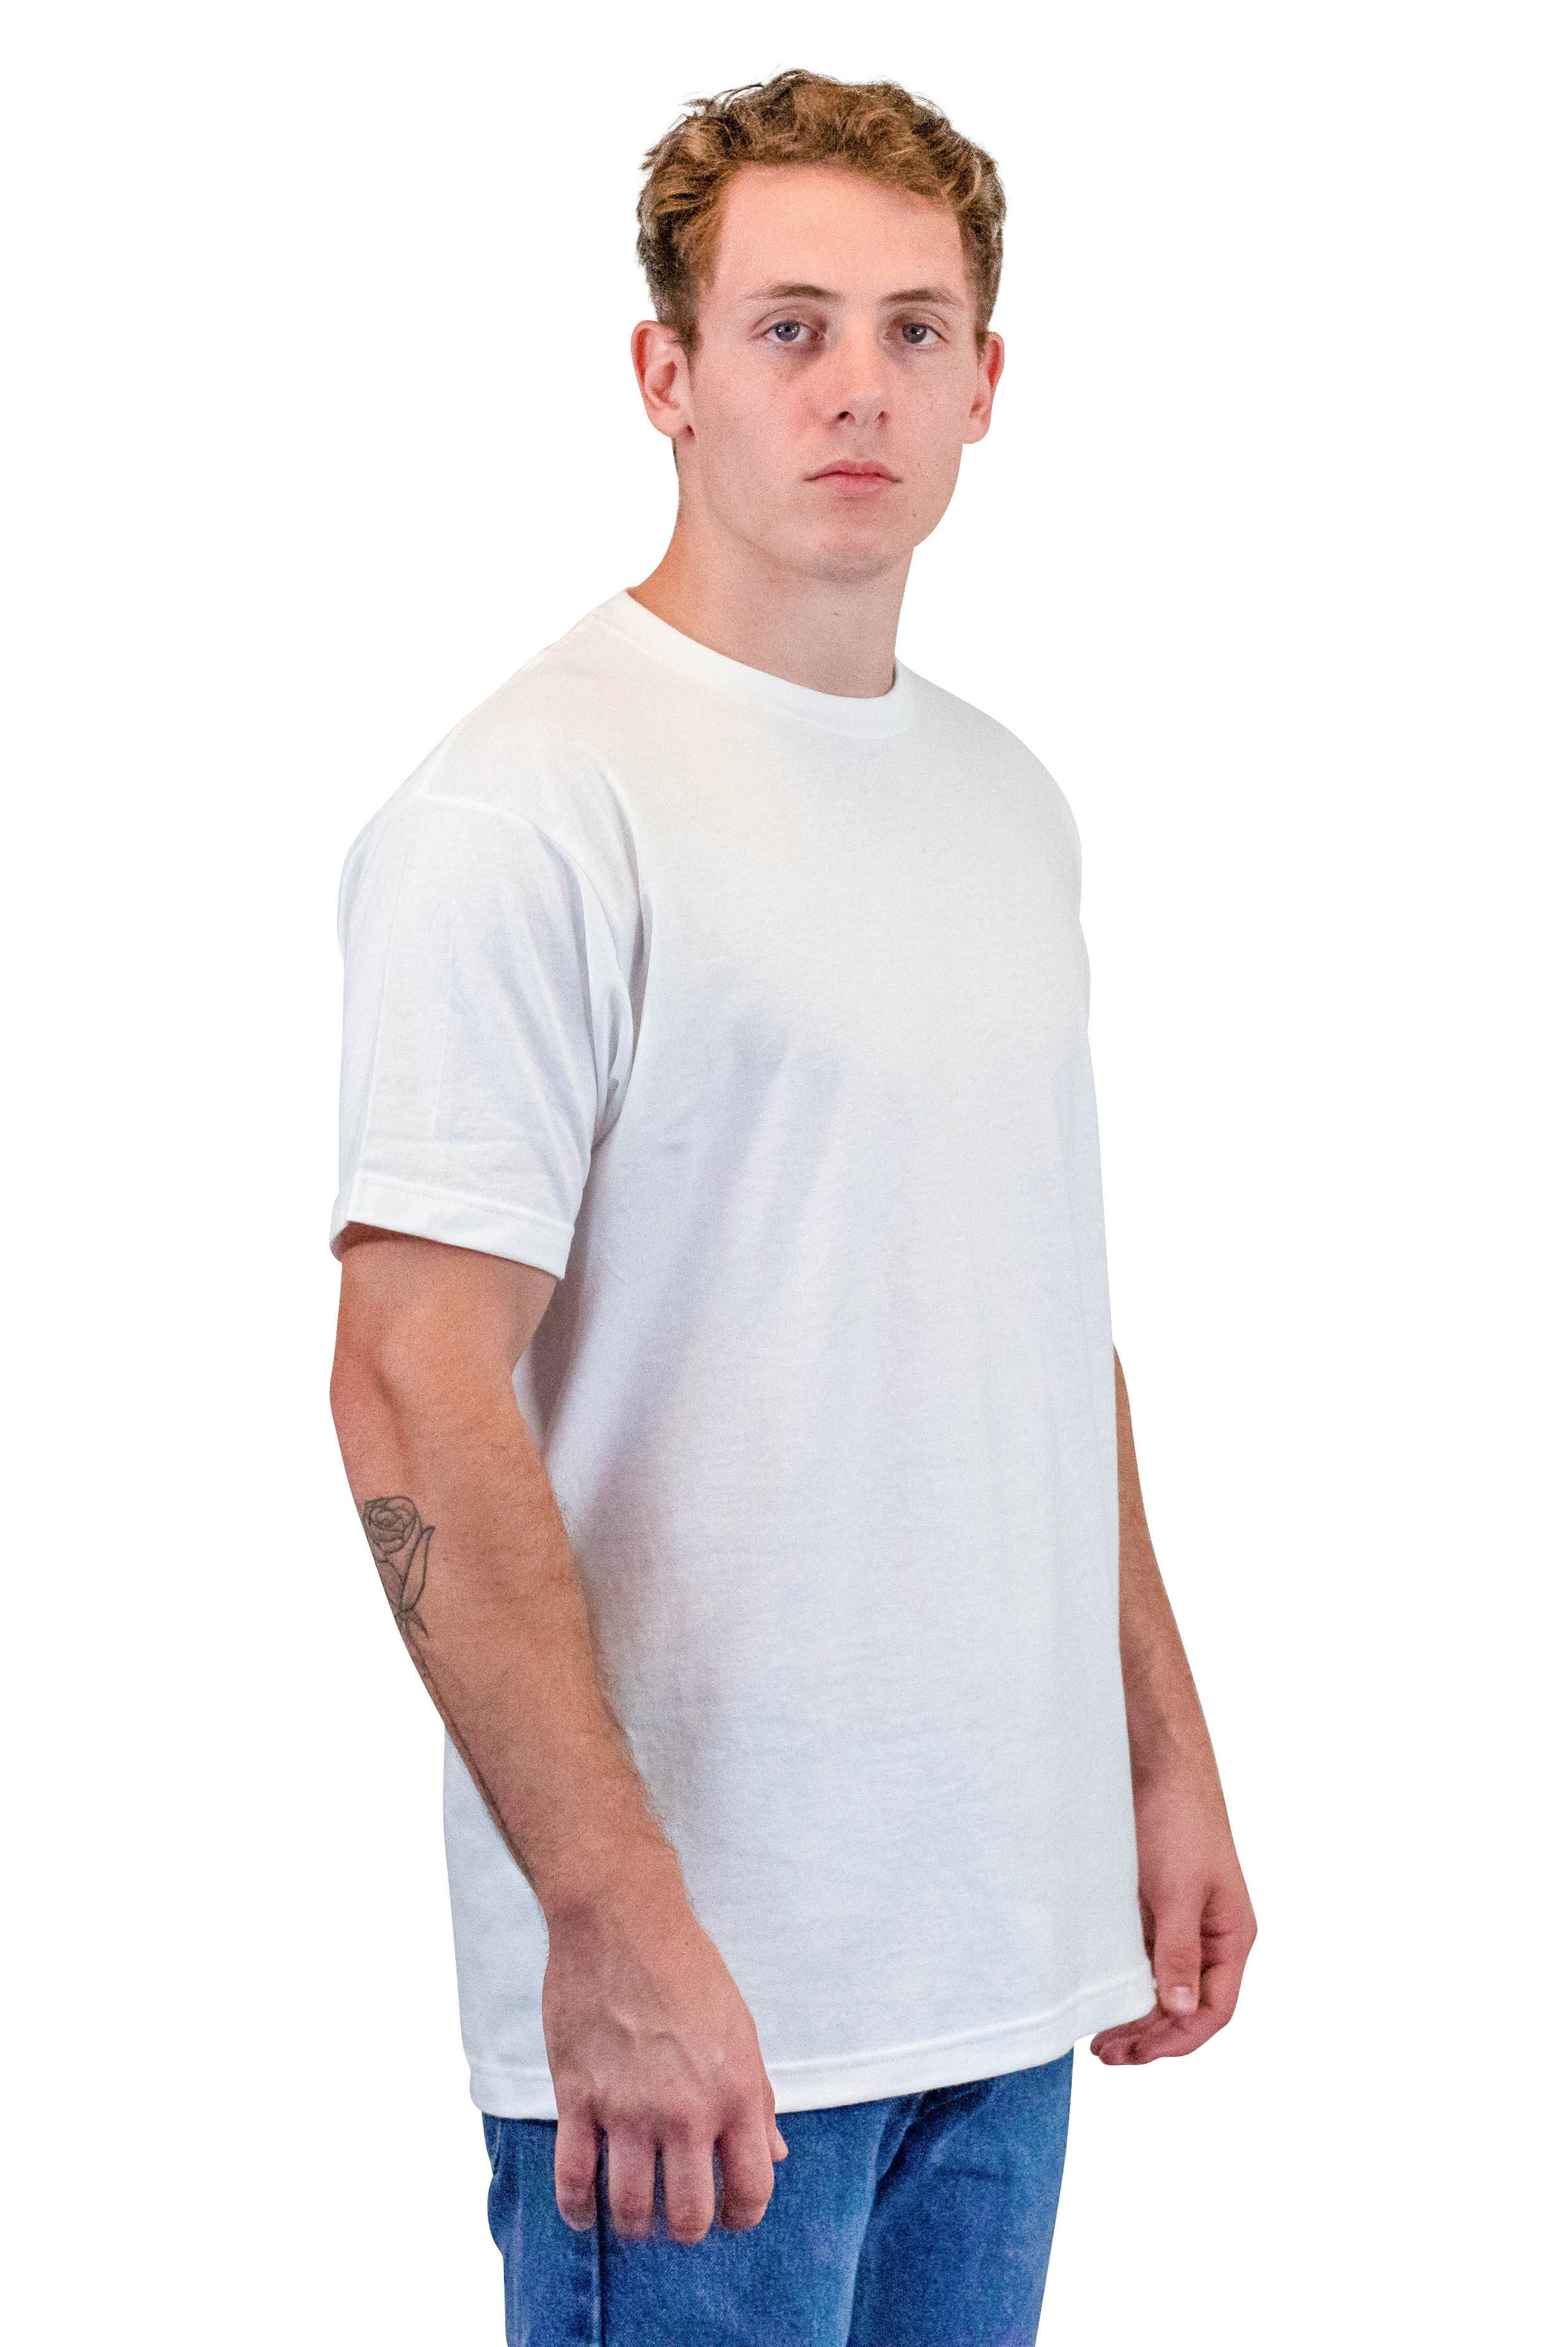 Tultex 0202 Unisex Tee with a Tear-Away Tag  White